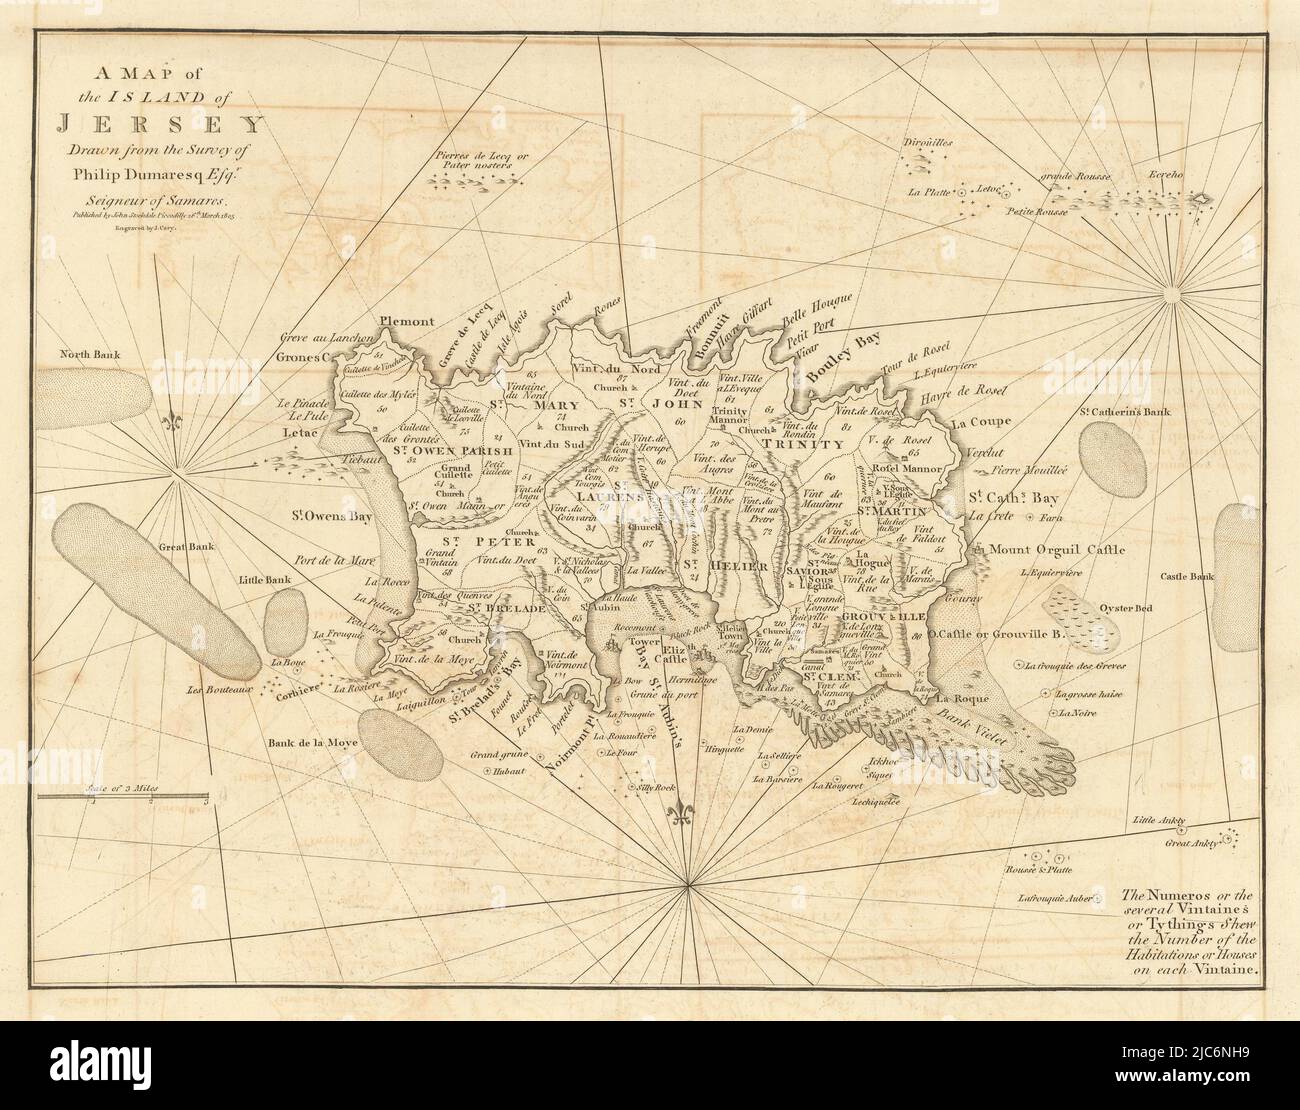 A map of the Island of Jersey by John CARY / Dumaresq. Channel Islands 1806 Stock Photo